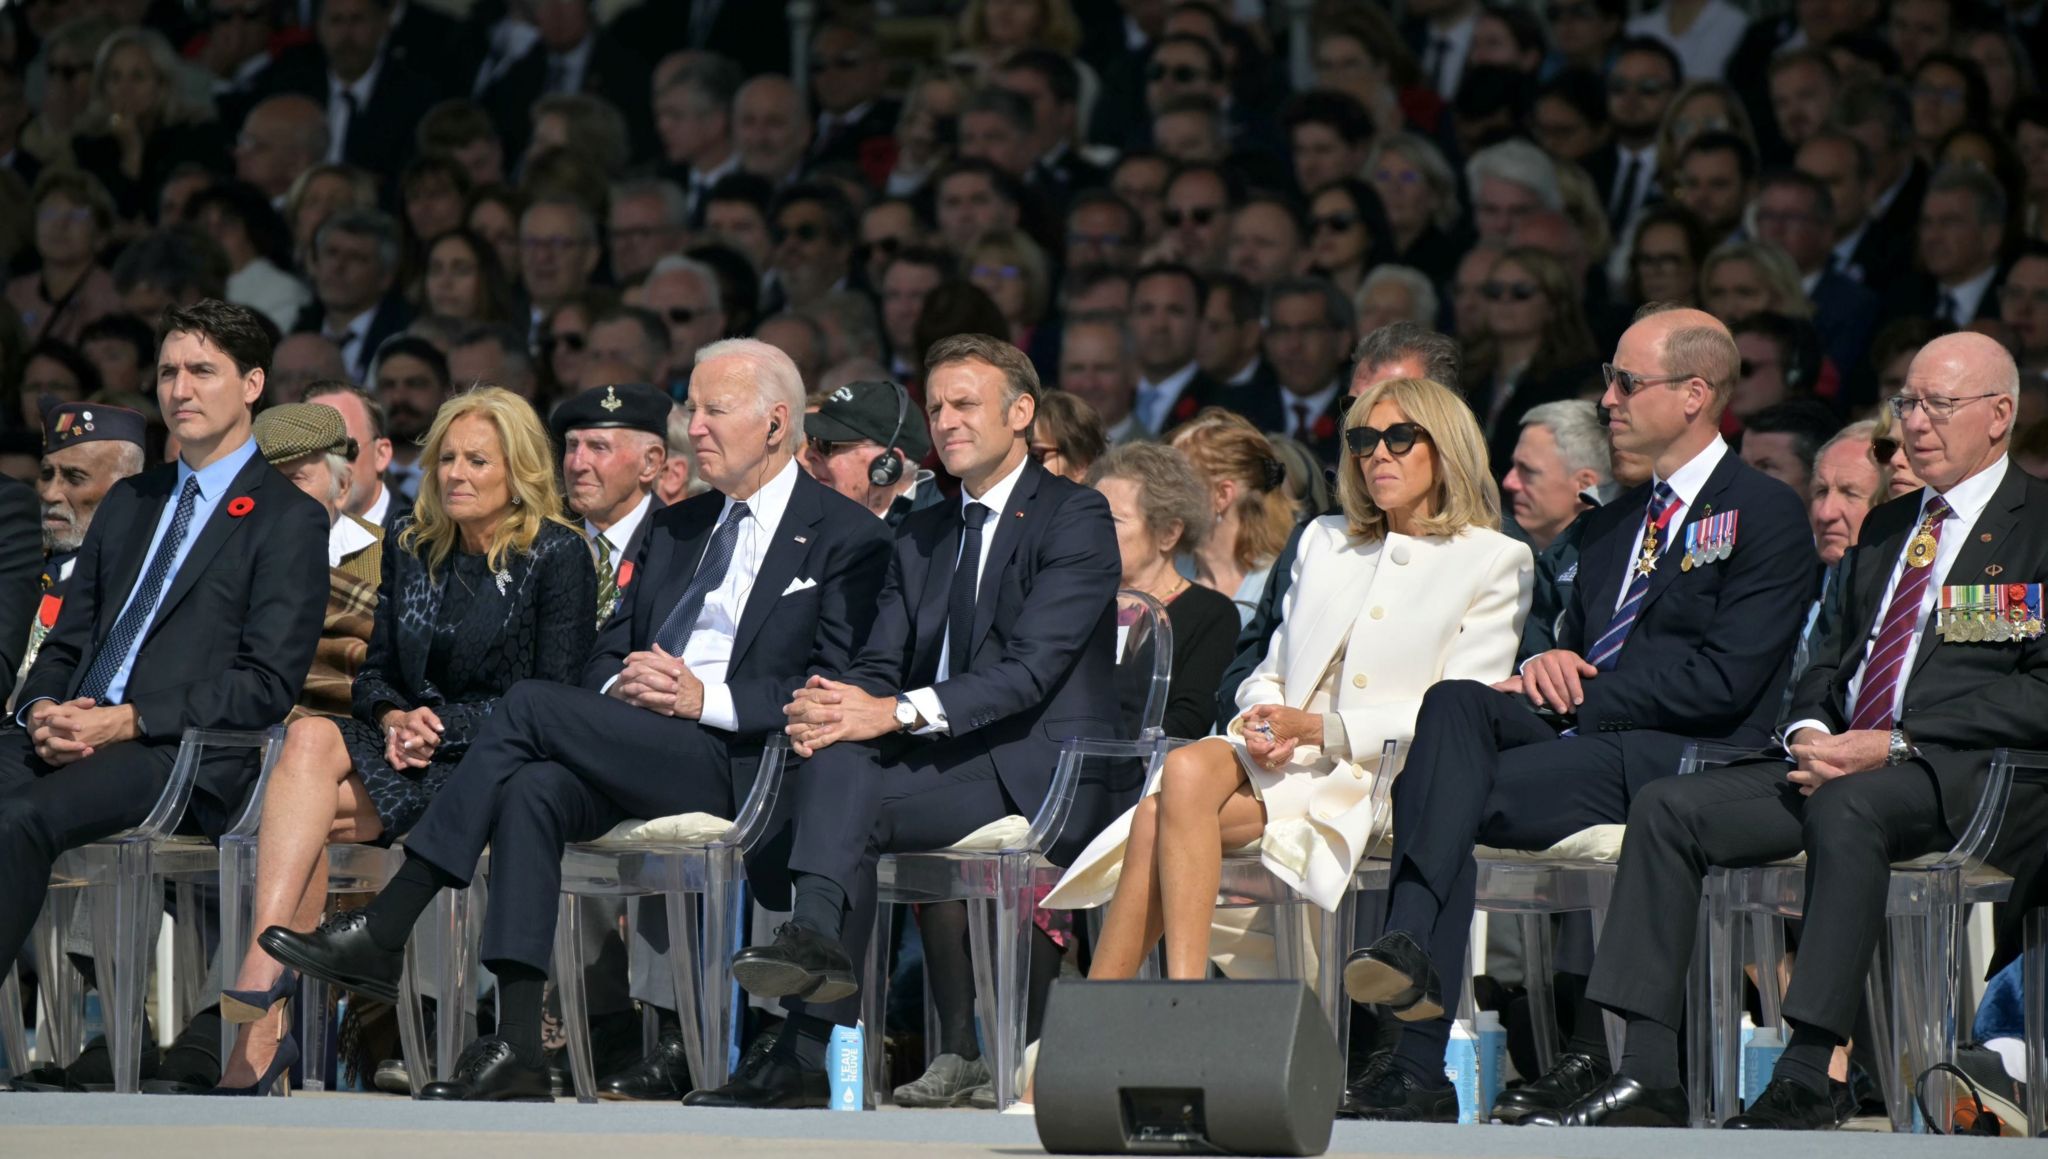 Prince William and world leaders at the final event on Omaha beach